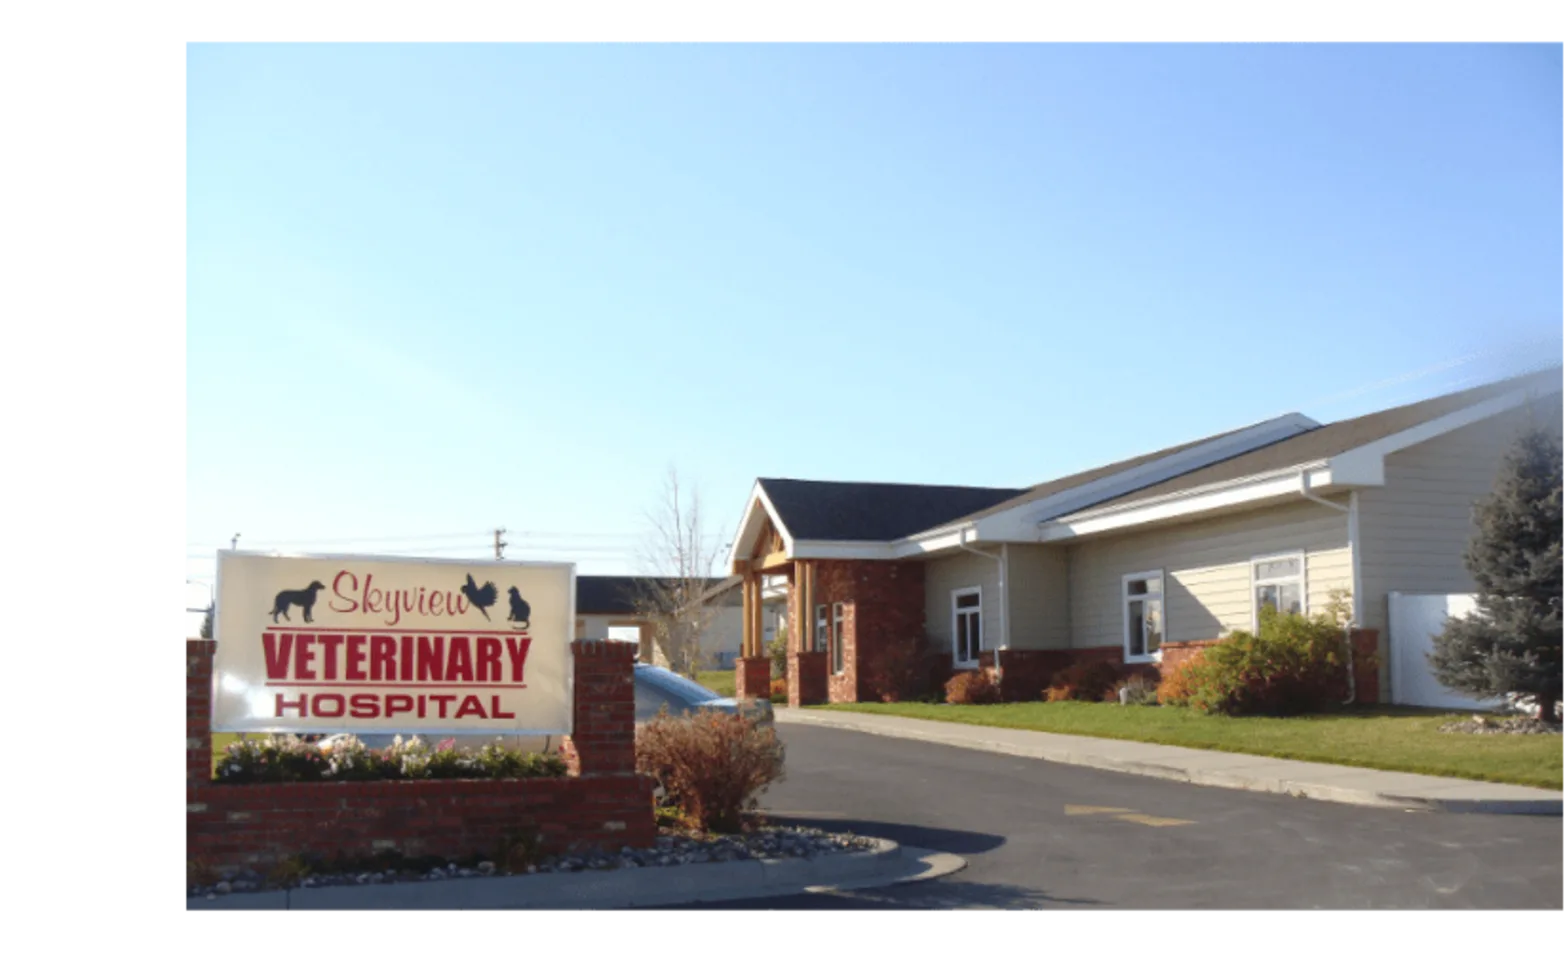 The entrance and facade of Skyview Veterinary Hospital